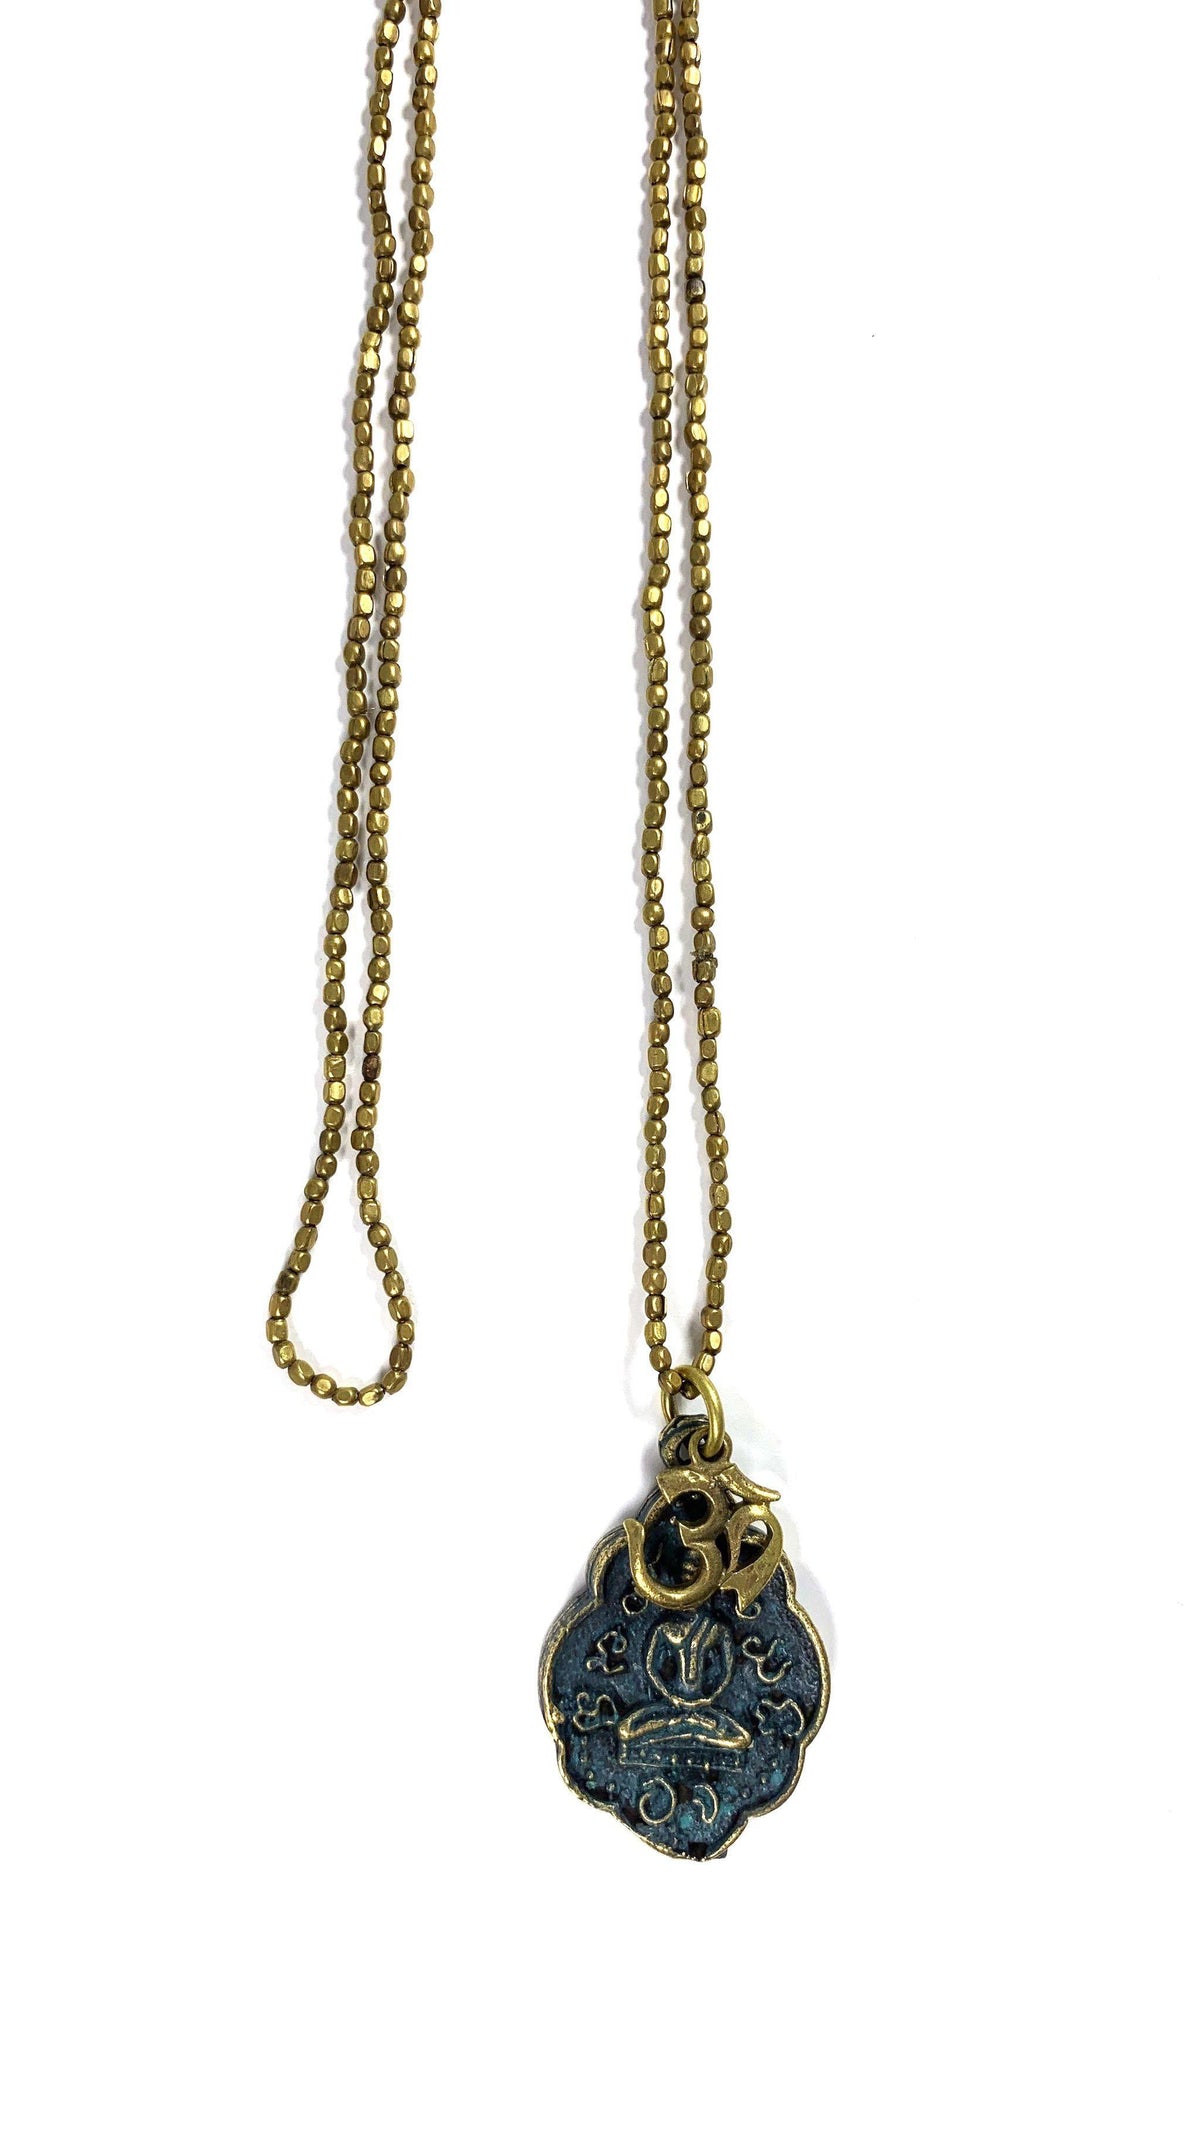 Bali Antique Buddha Necklace with Om Charm